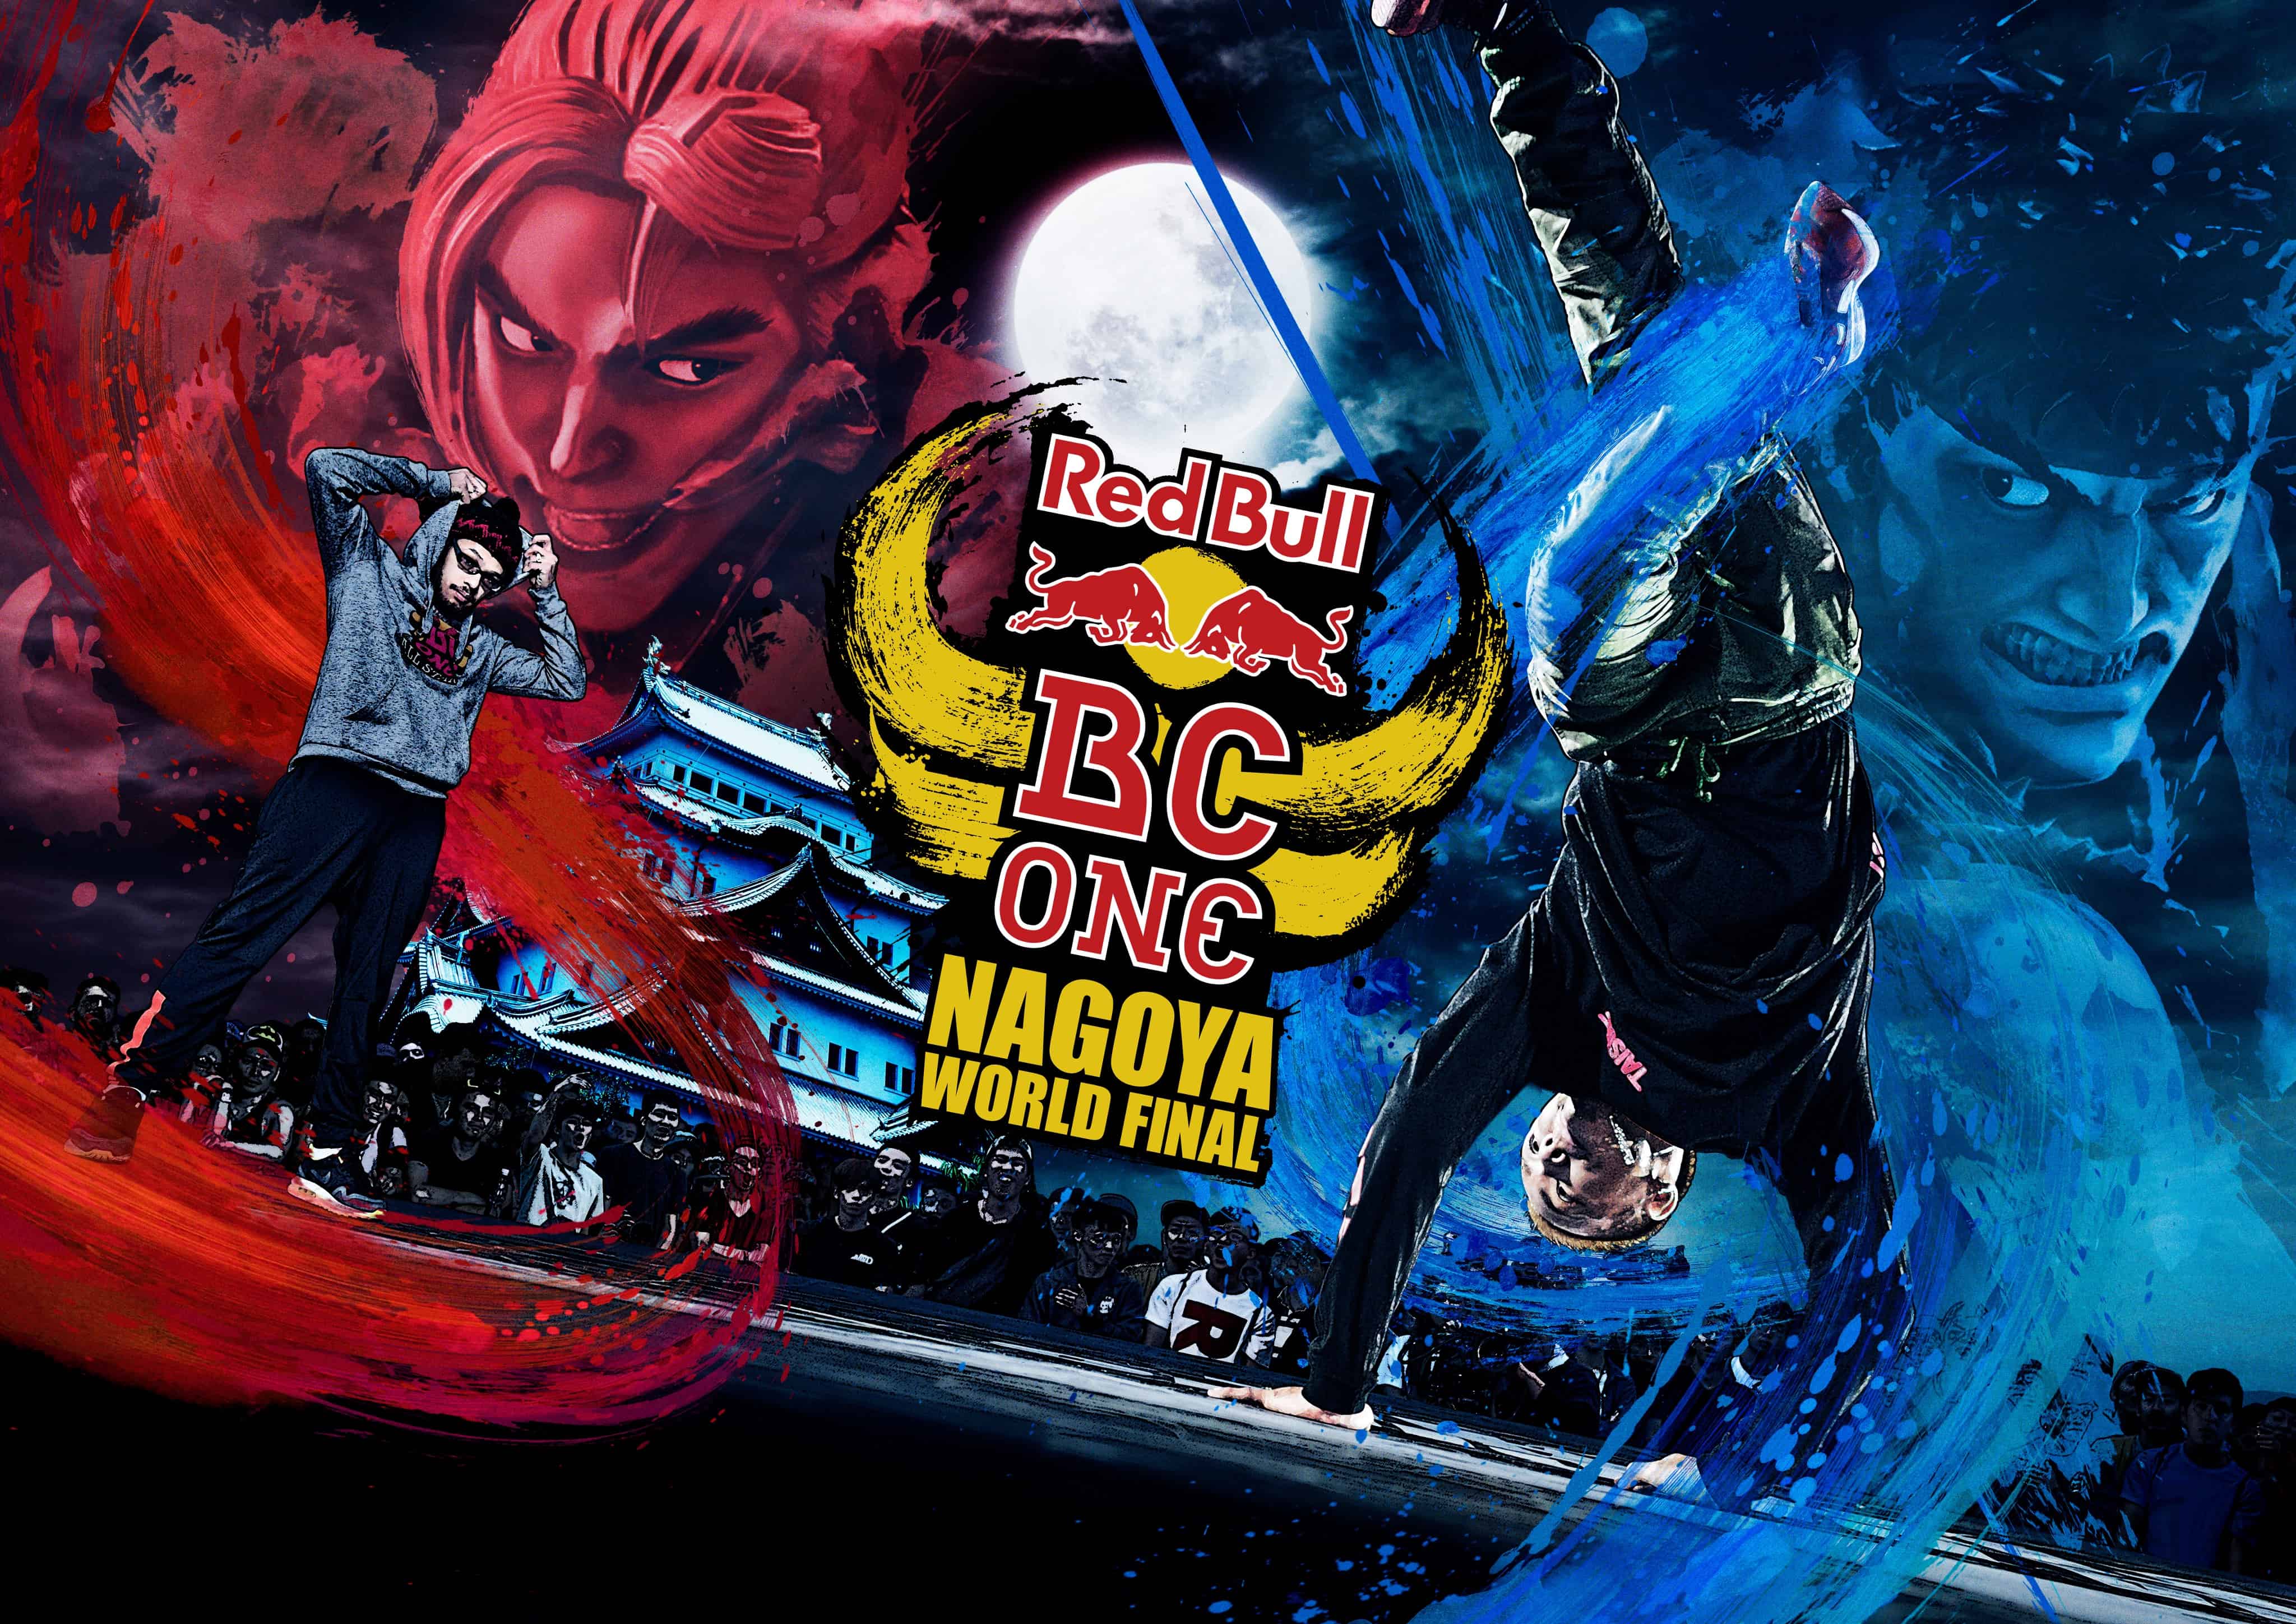 RED BULL BC ONE WORLD FINAL 2016